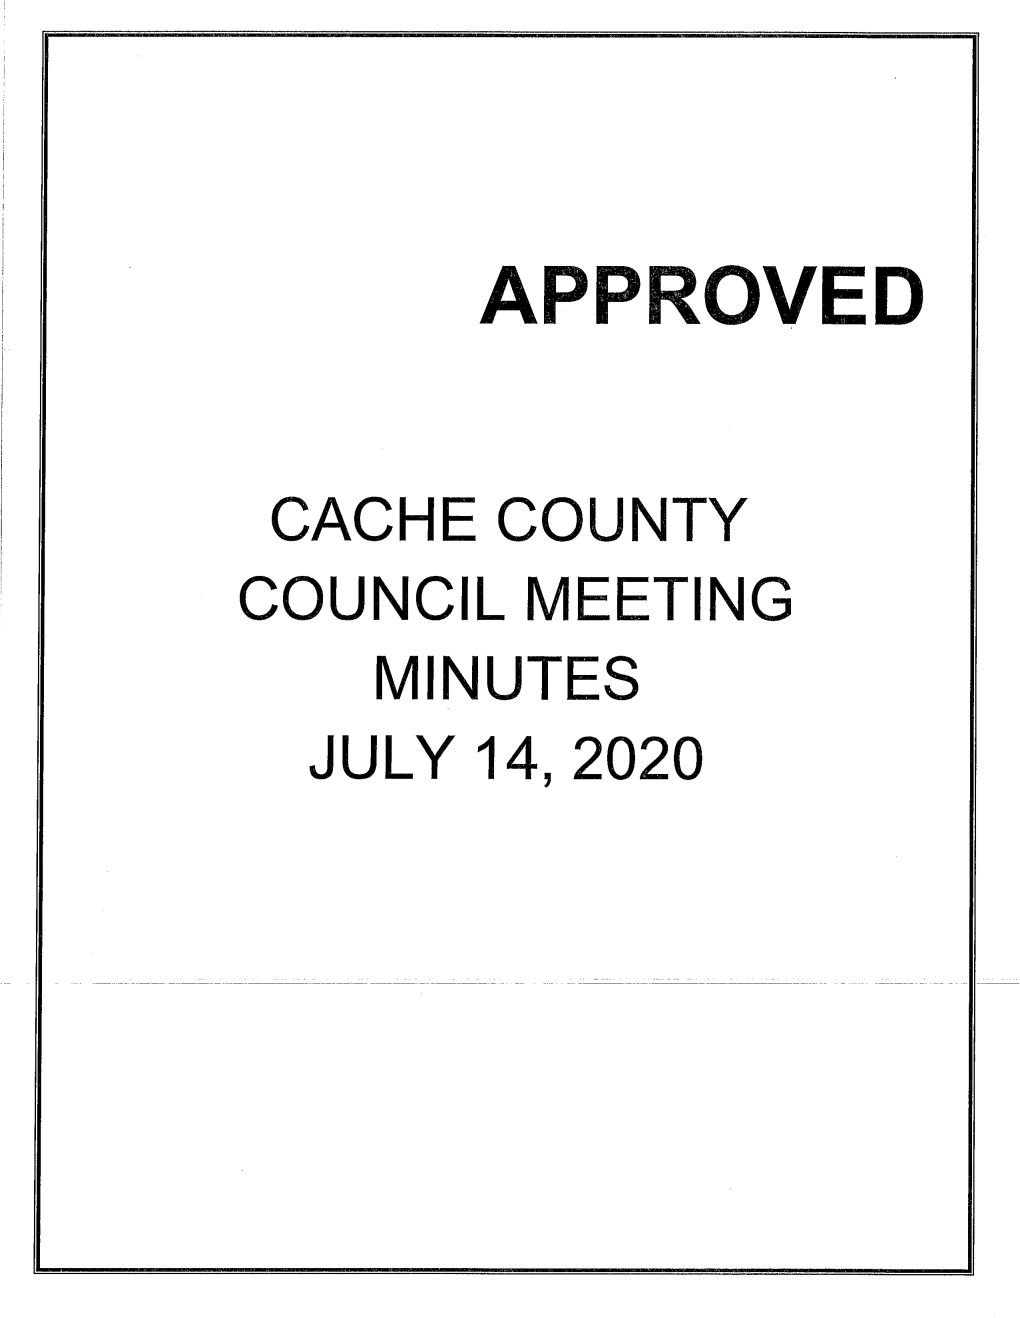 07-14-2020 APPROVED.Pdf